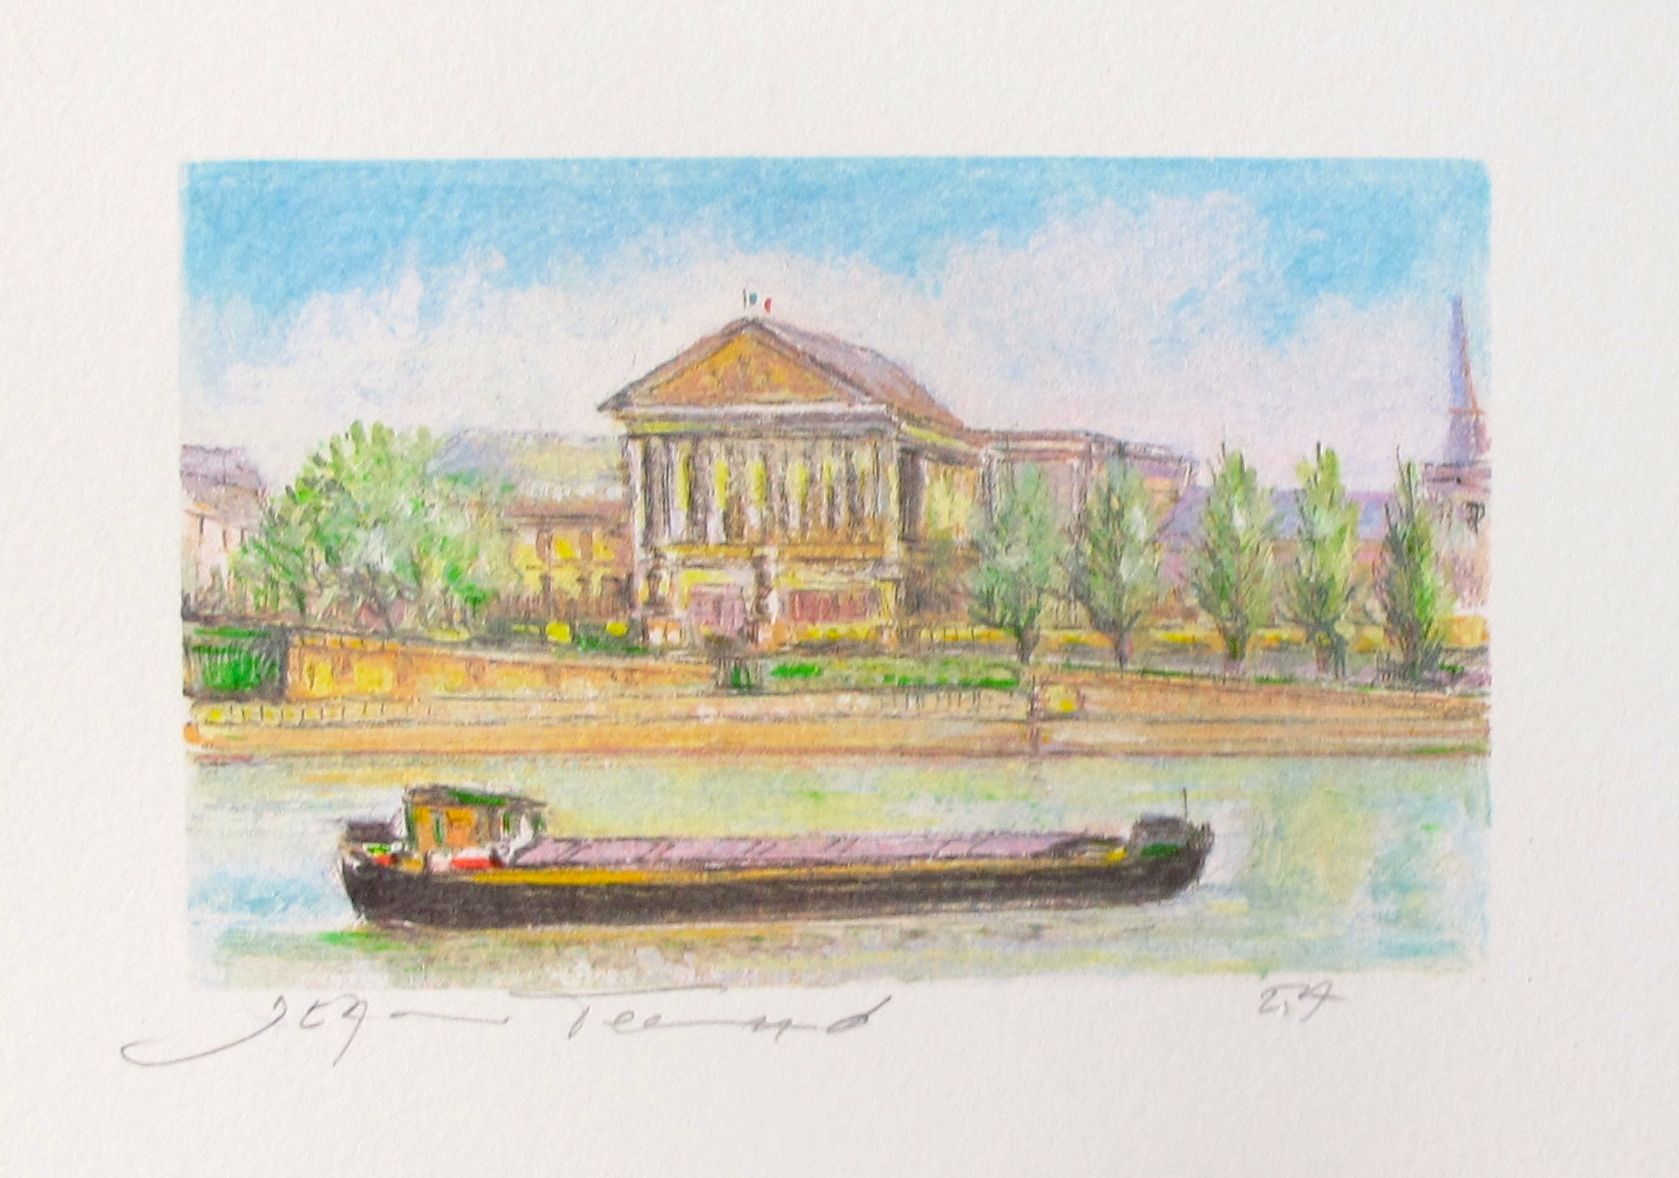 Jean Fernand THE BARGE Hand Signed Limited Edition Lithograph